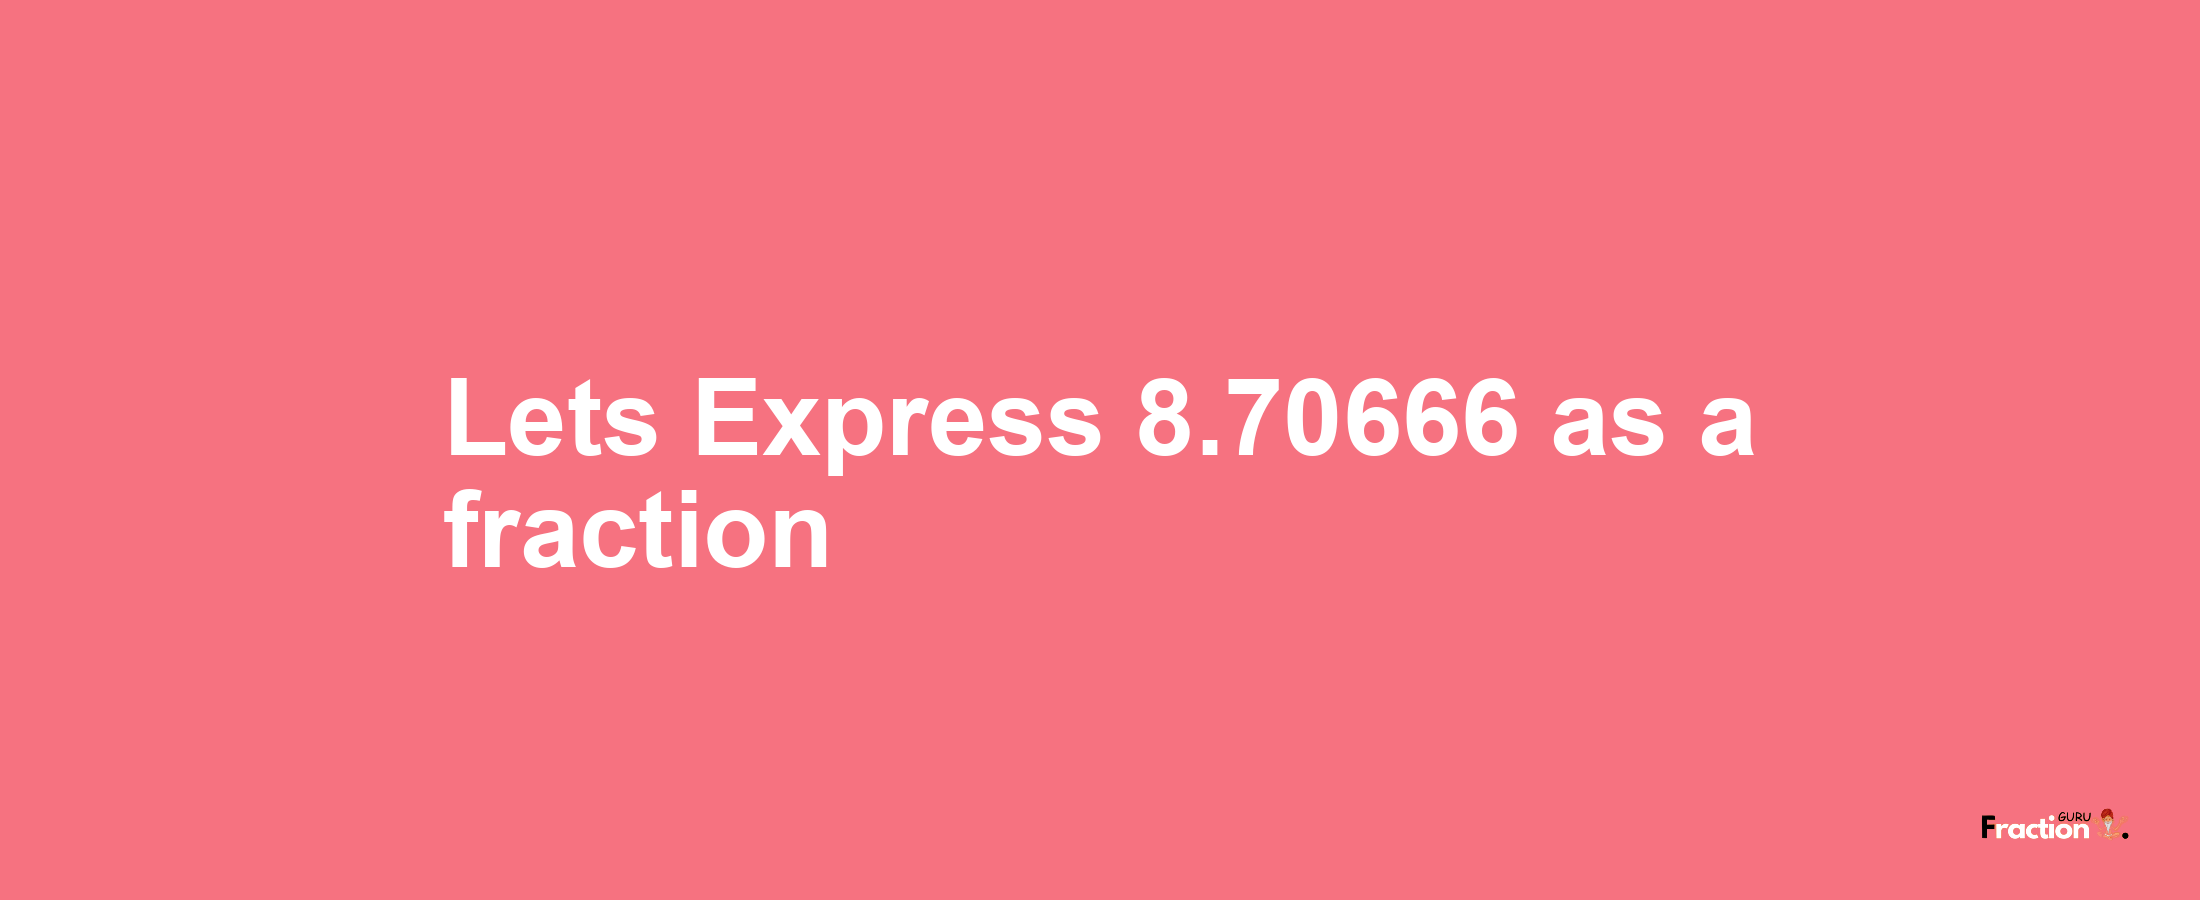 Lets Express 8.70666 as afraction